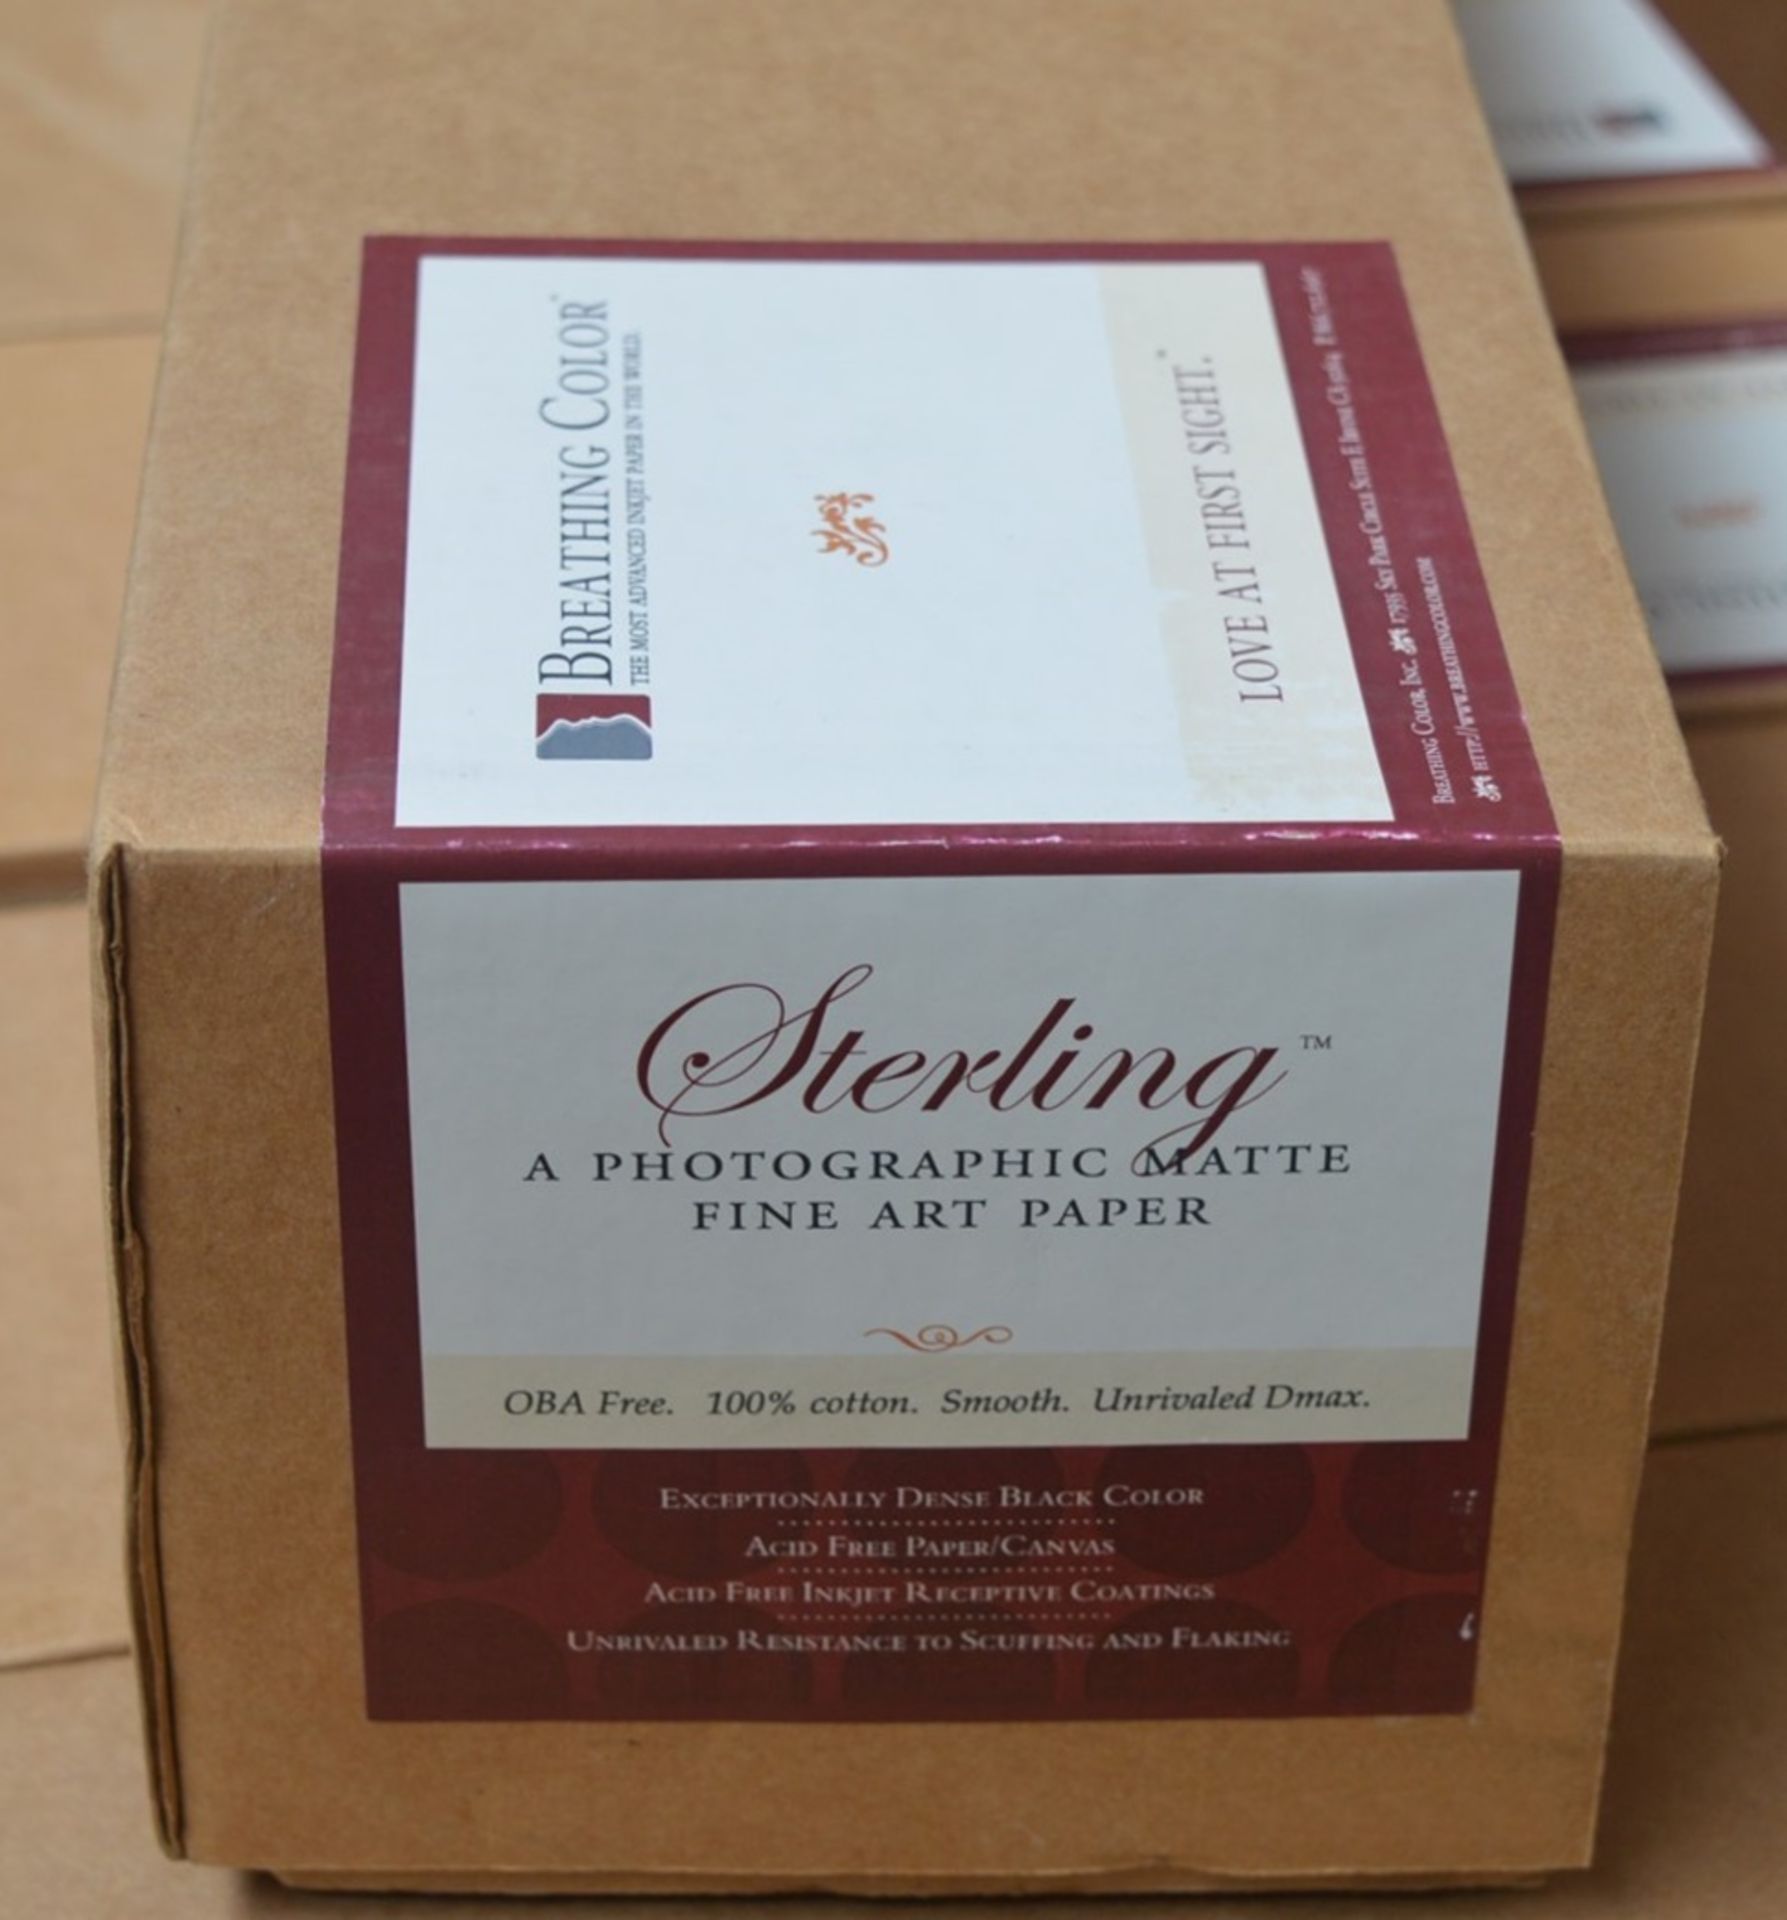 1 x Roll of Breathing Colour STERLING Photographic Matte Fine Art Paper - Size 44" x 50' - - Image 3 of 5